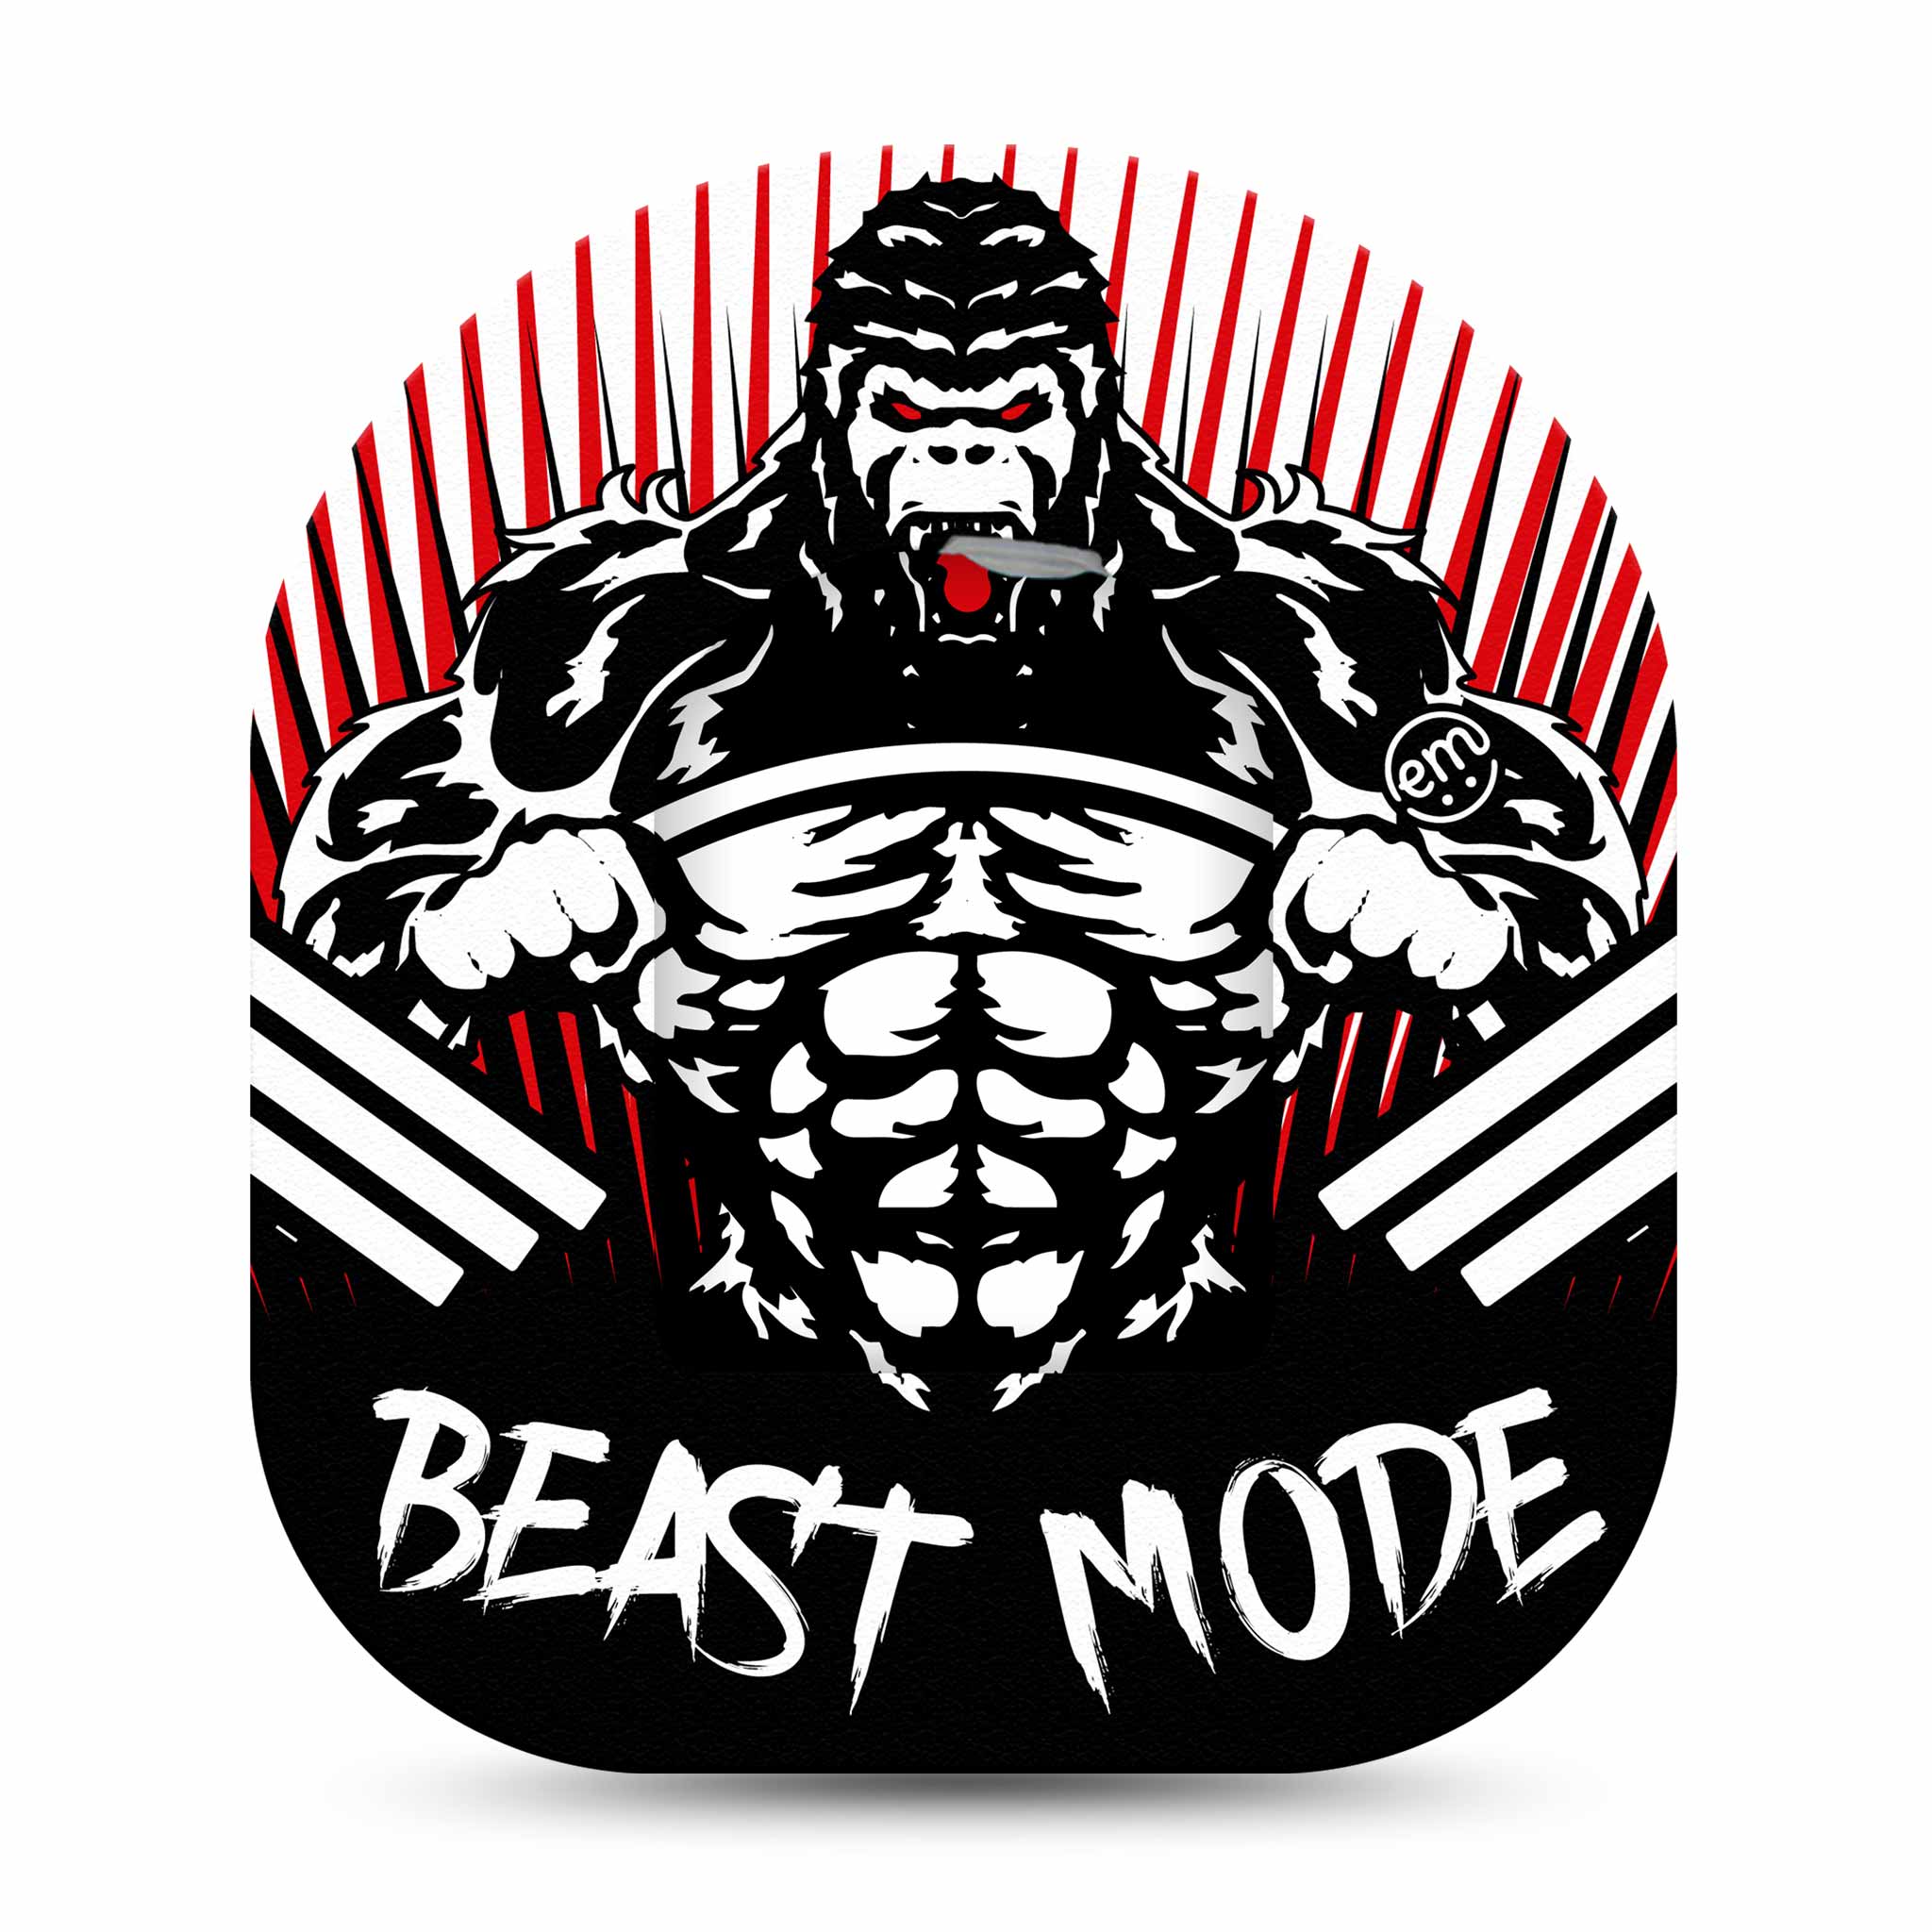 Beast Ball Stickers for Sale